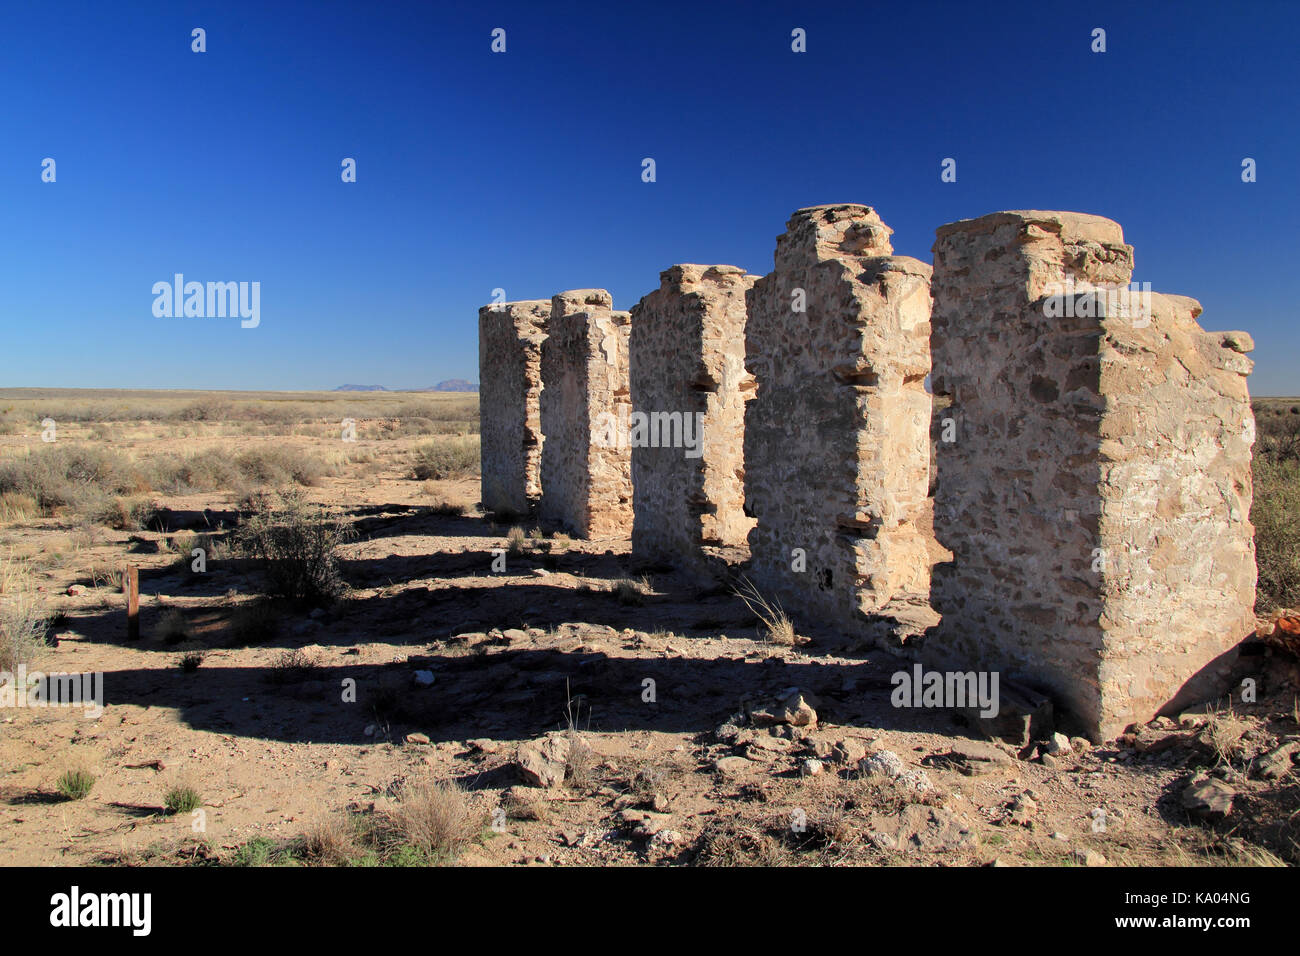 Numerous ruins of old military structures can be found scattered throughout the grounds of historic Fort Craig, located in the US state of New Mexico Stock Photo